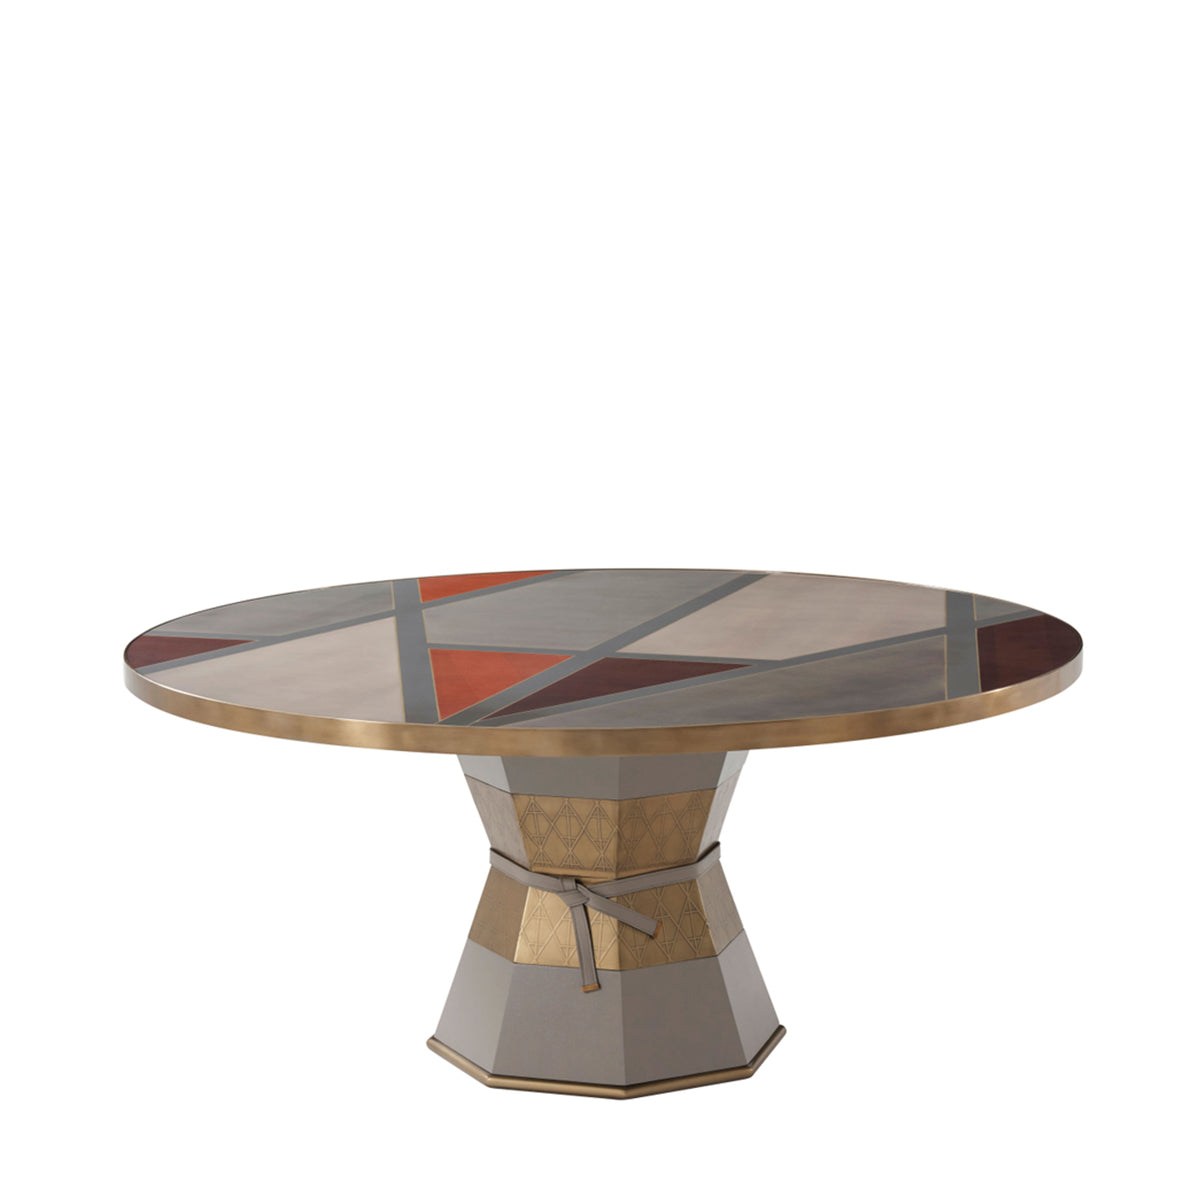 ICONIC ROUND DINING TABLE II